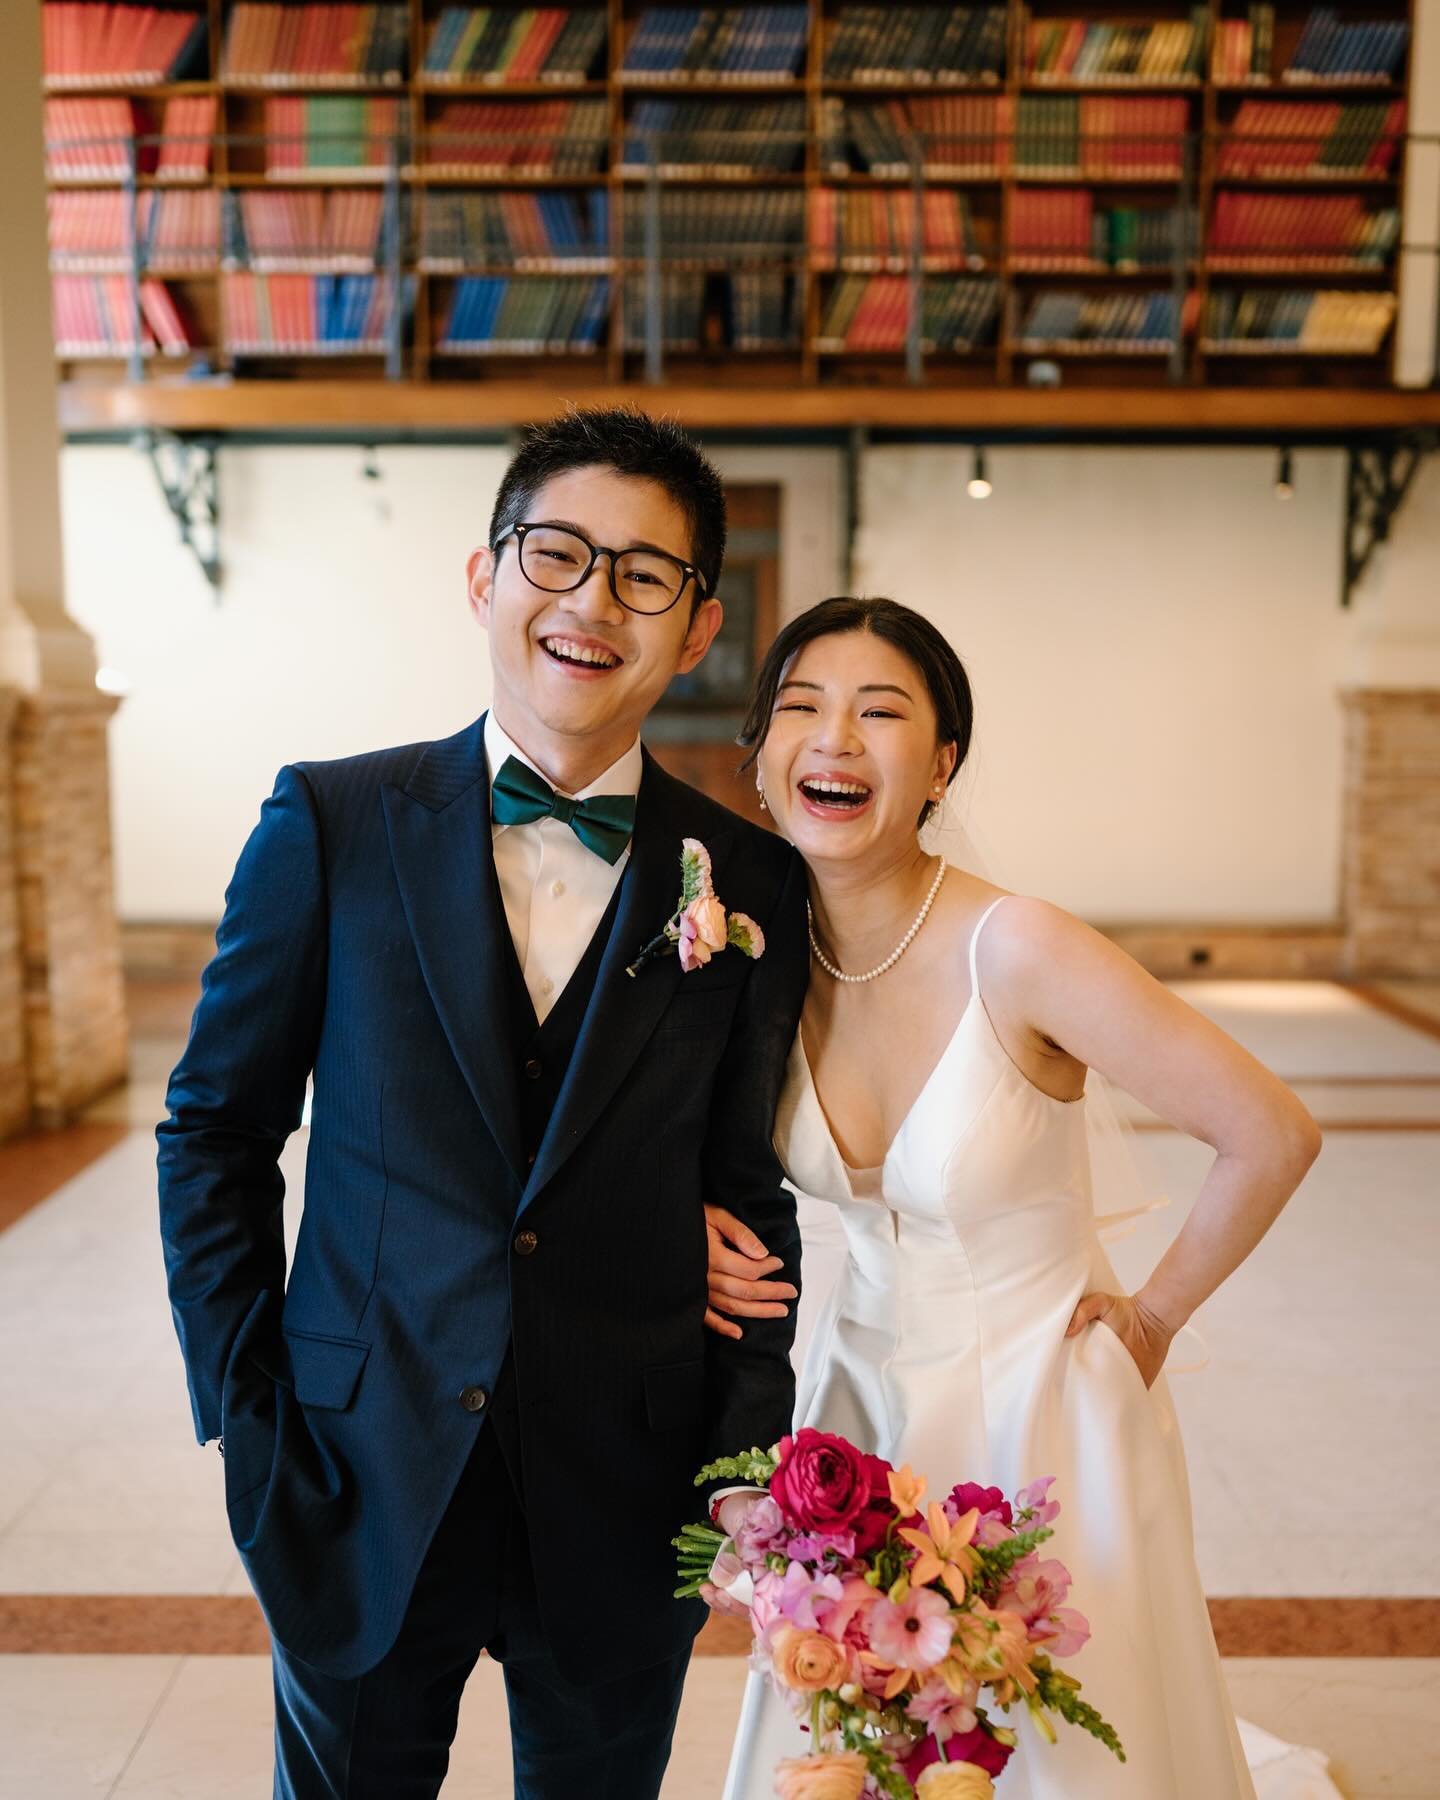 As the world rushed on and commuters made their way to their offices on a Monday morning, S+K got married in a quiet room in the Boston Public Library with a few of their closest loved ones in attendance. The contrast of the hustle and bustle of the 